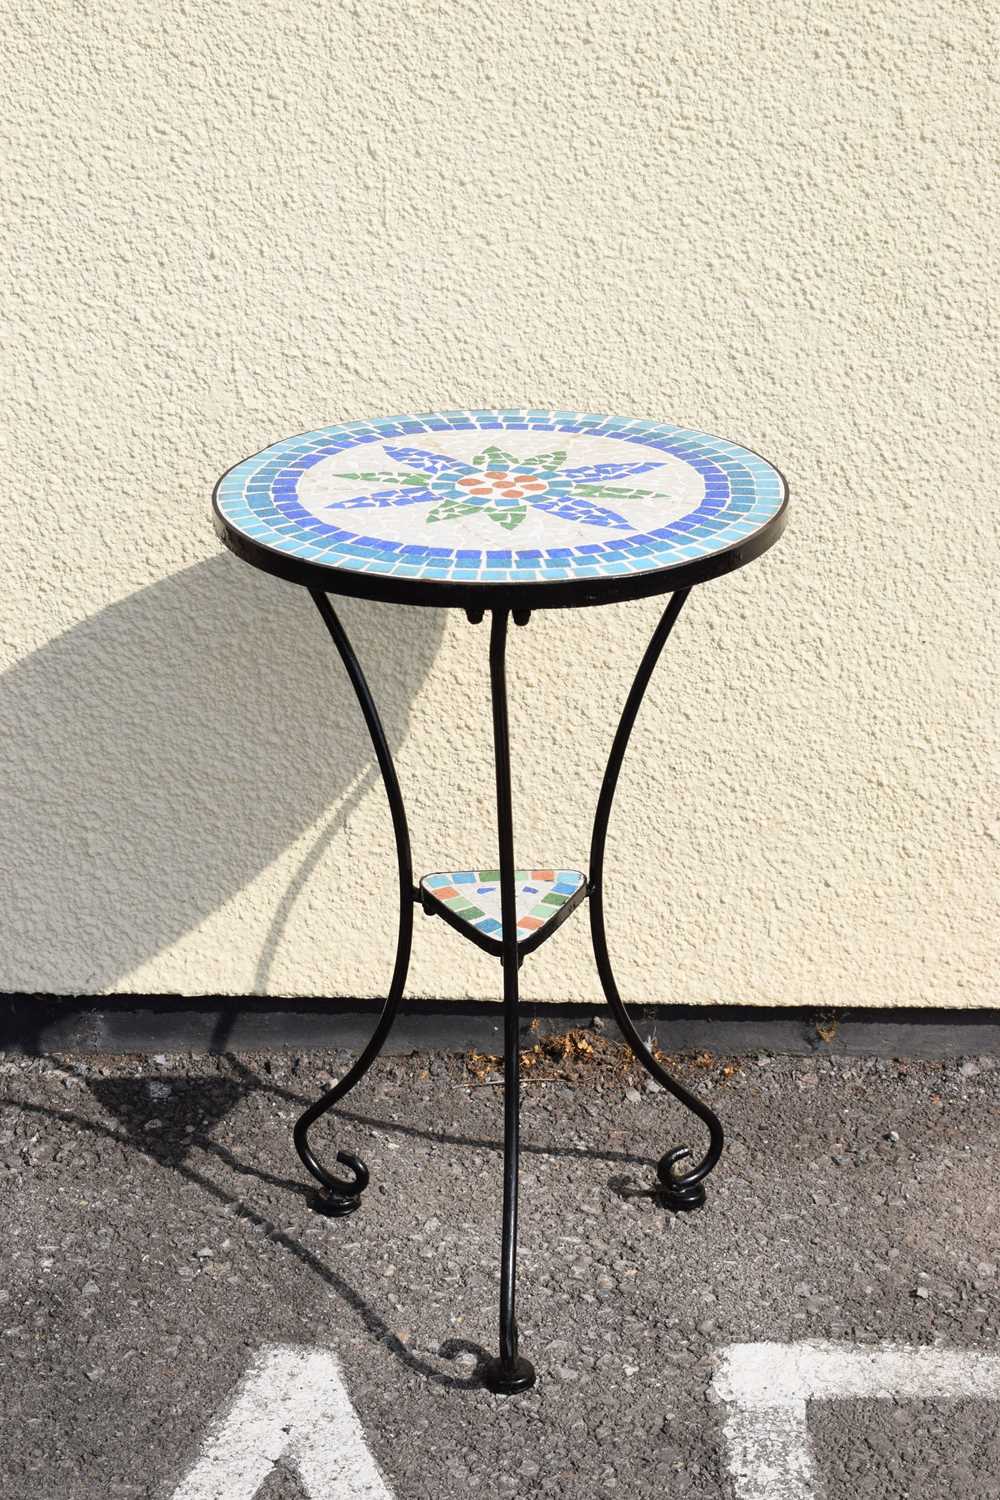 Mosaic topped metal two-tier patio table - Image 5 of 5